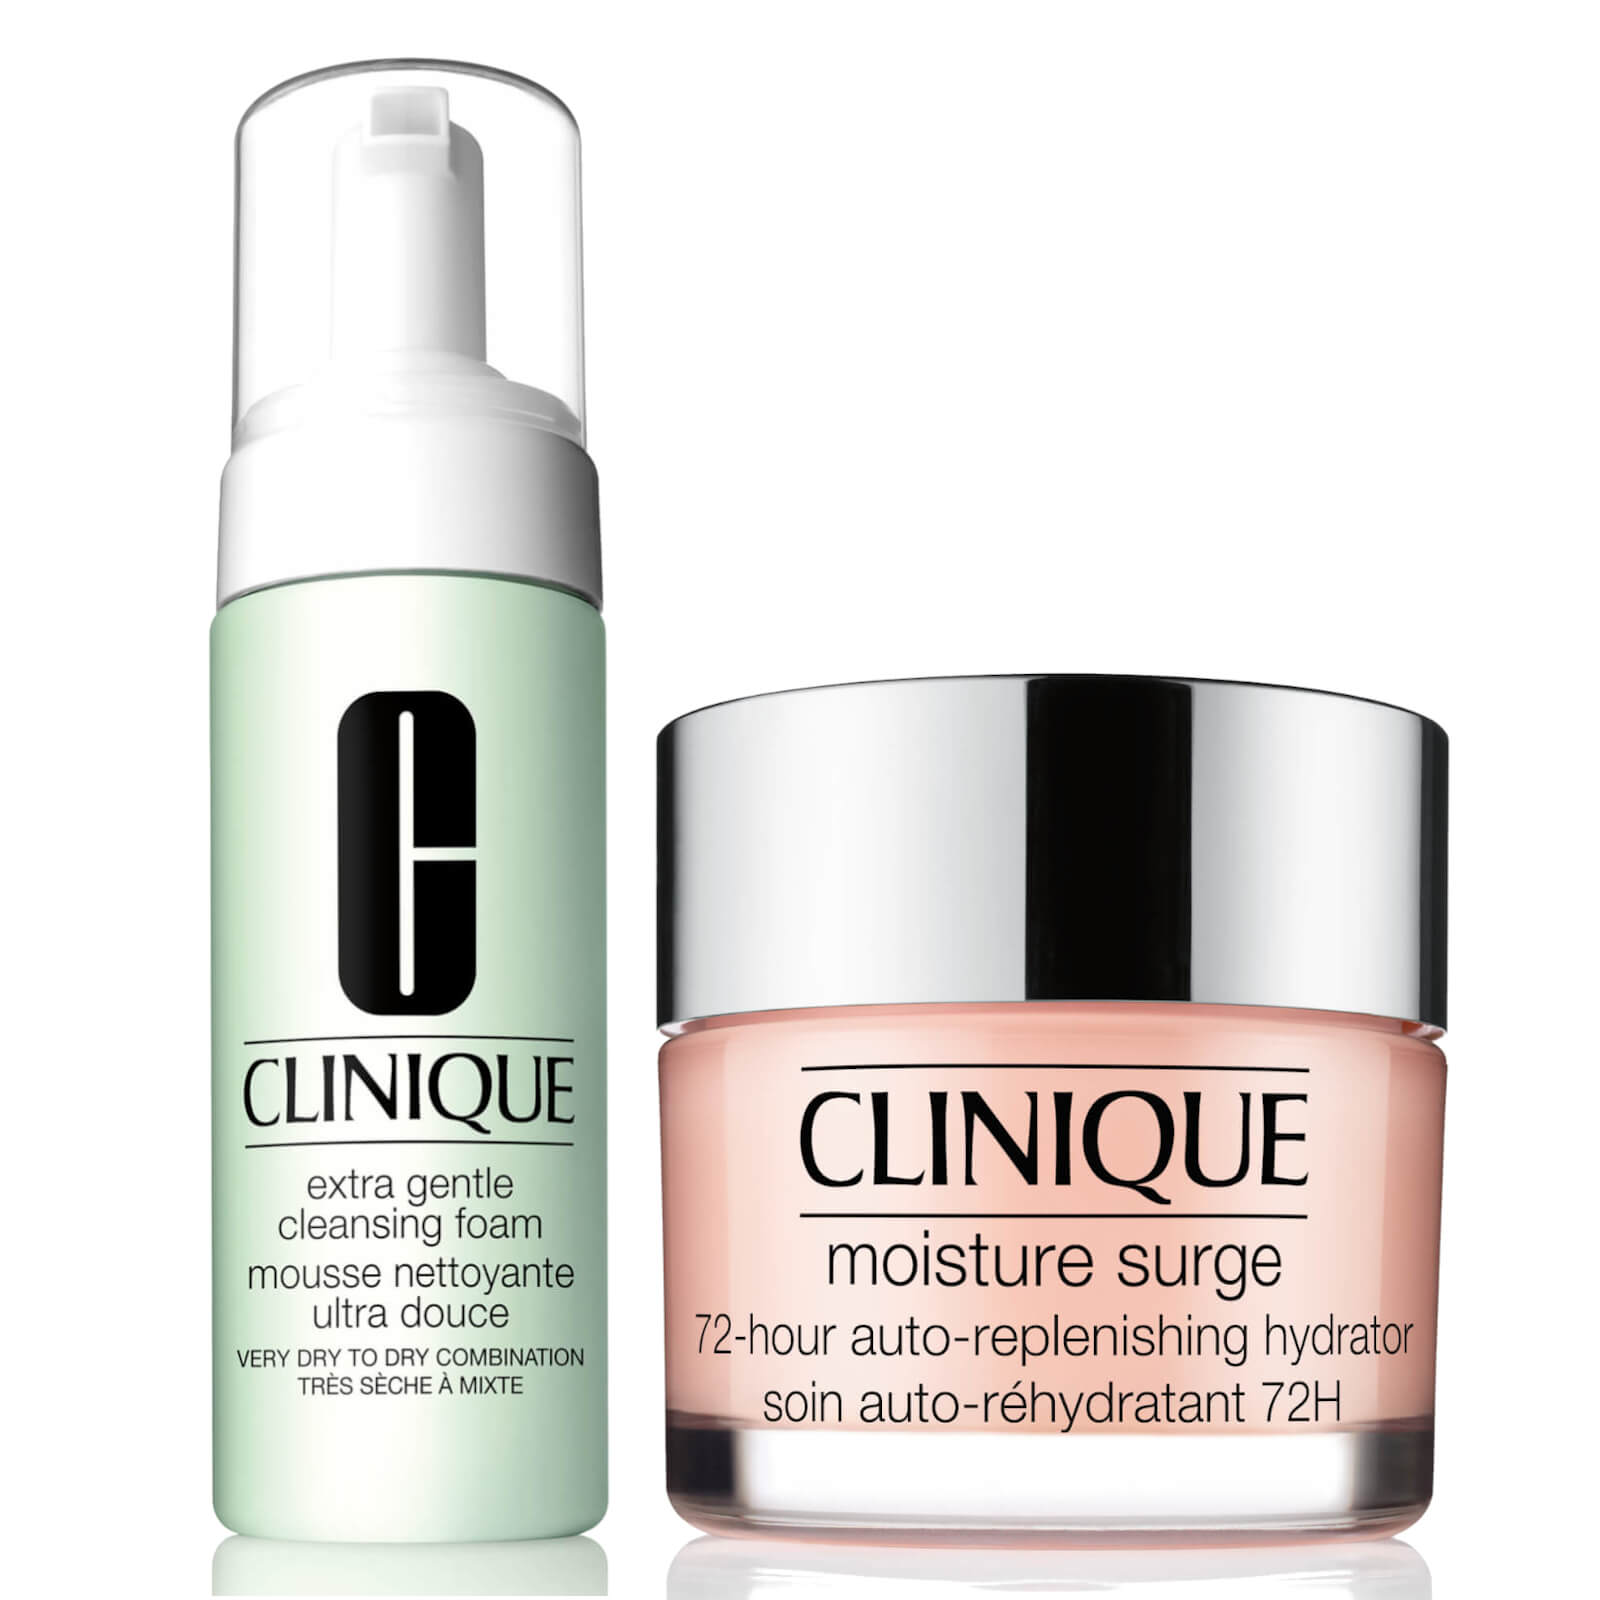 Clinique Moisture Surge 72-Hour Auto-Replenishing Hydrator 50ml and Extra Gentle Cleansing Foam 125ml Duo